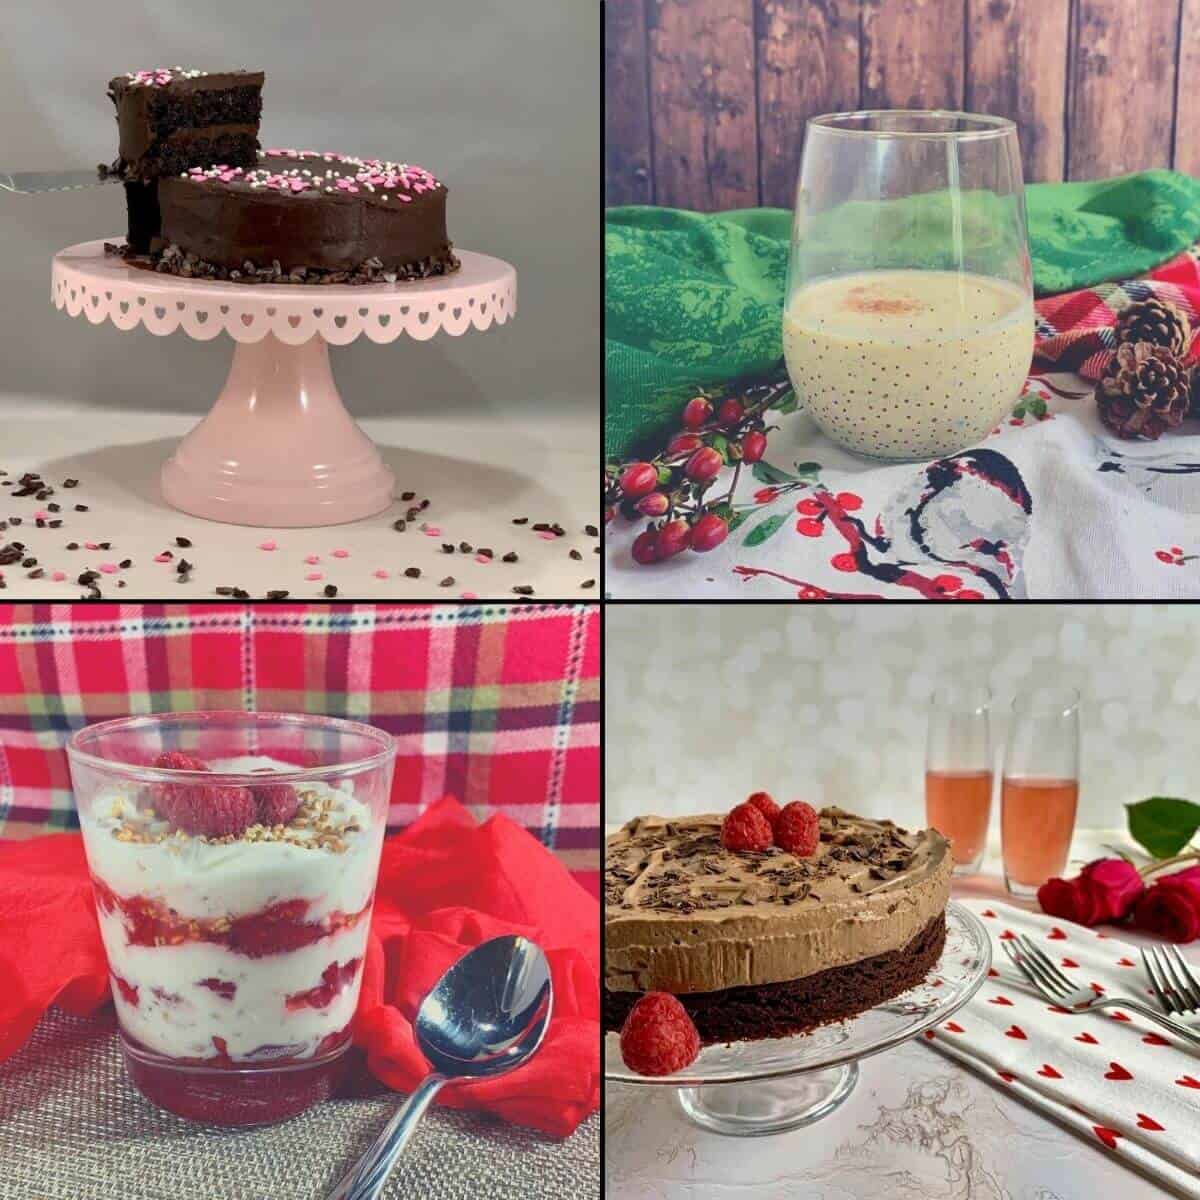 Collage of Port Wine cake, eggnog, glass of Four Roses Bourbon, Chocolate Mousse Cake.